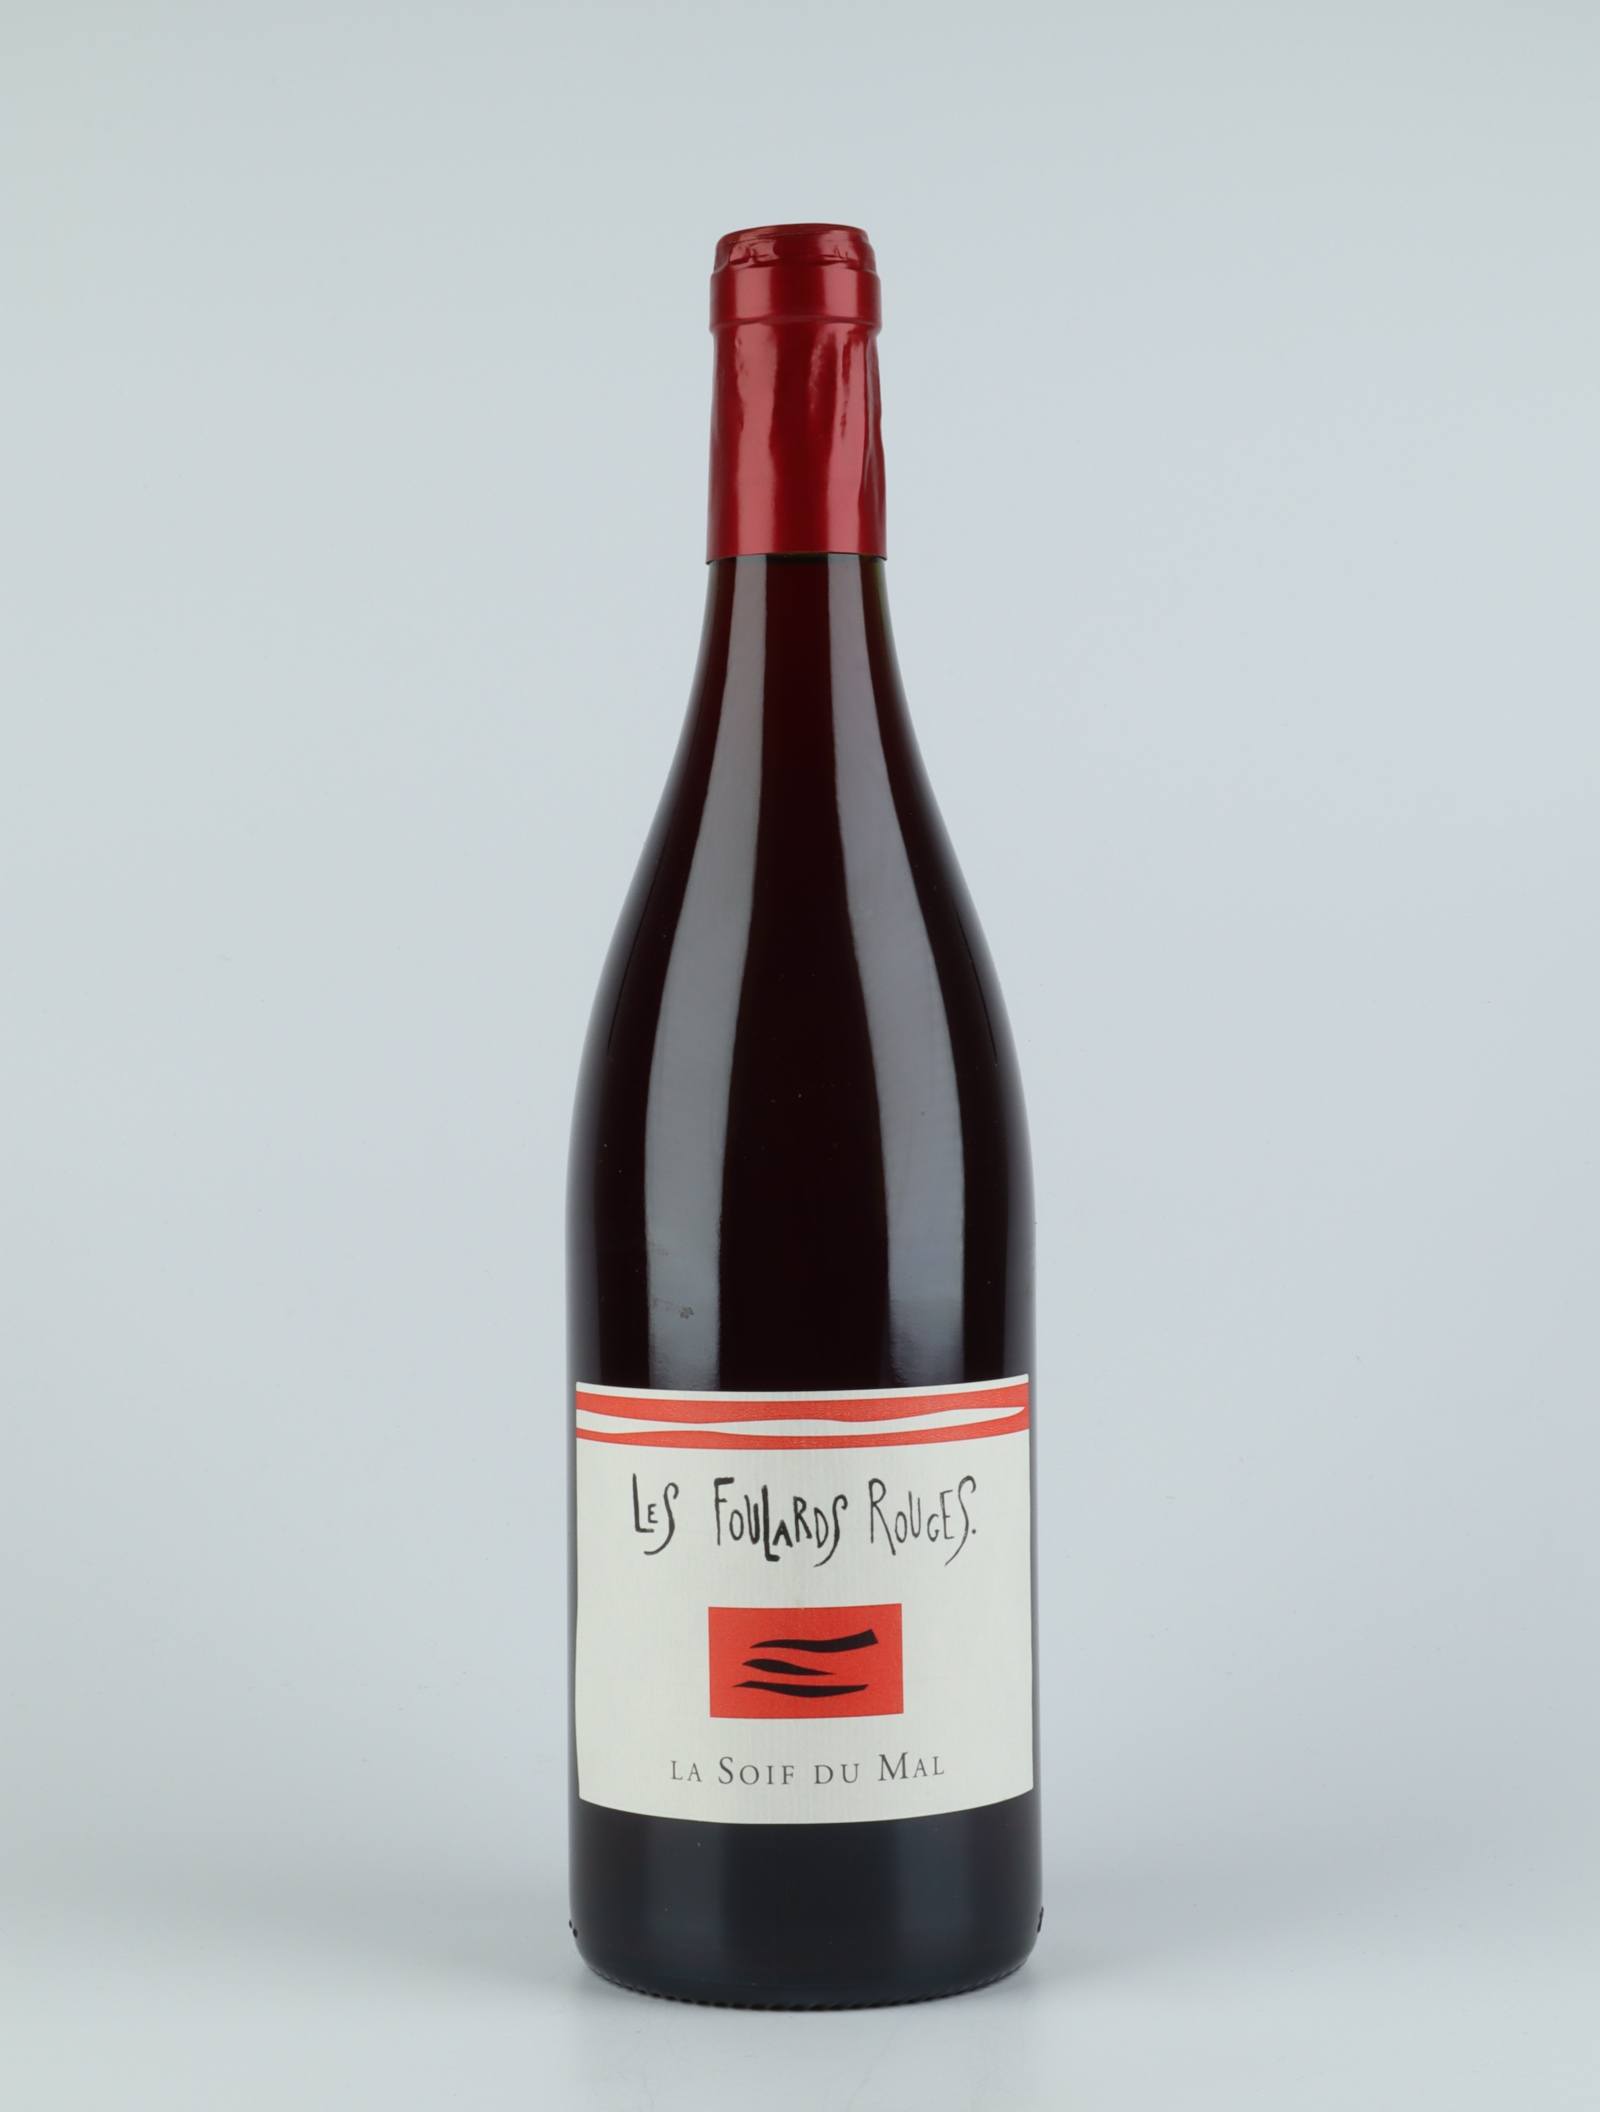 A bottle 2019 Soif du Mal Rouge Red wine from Les Foulards Rouges, Languedoc in France